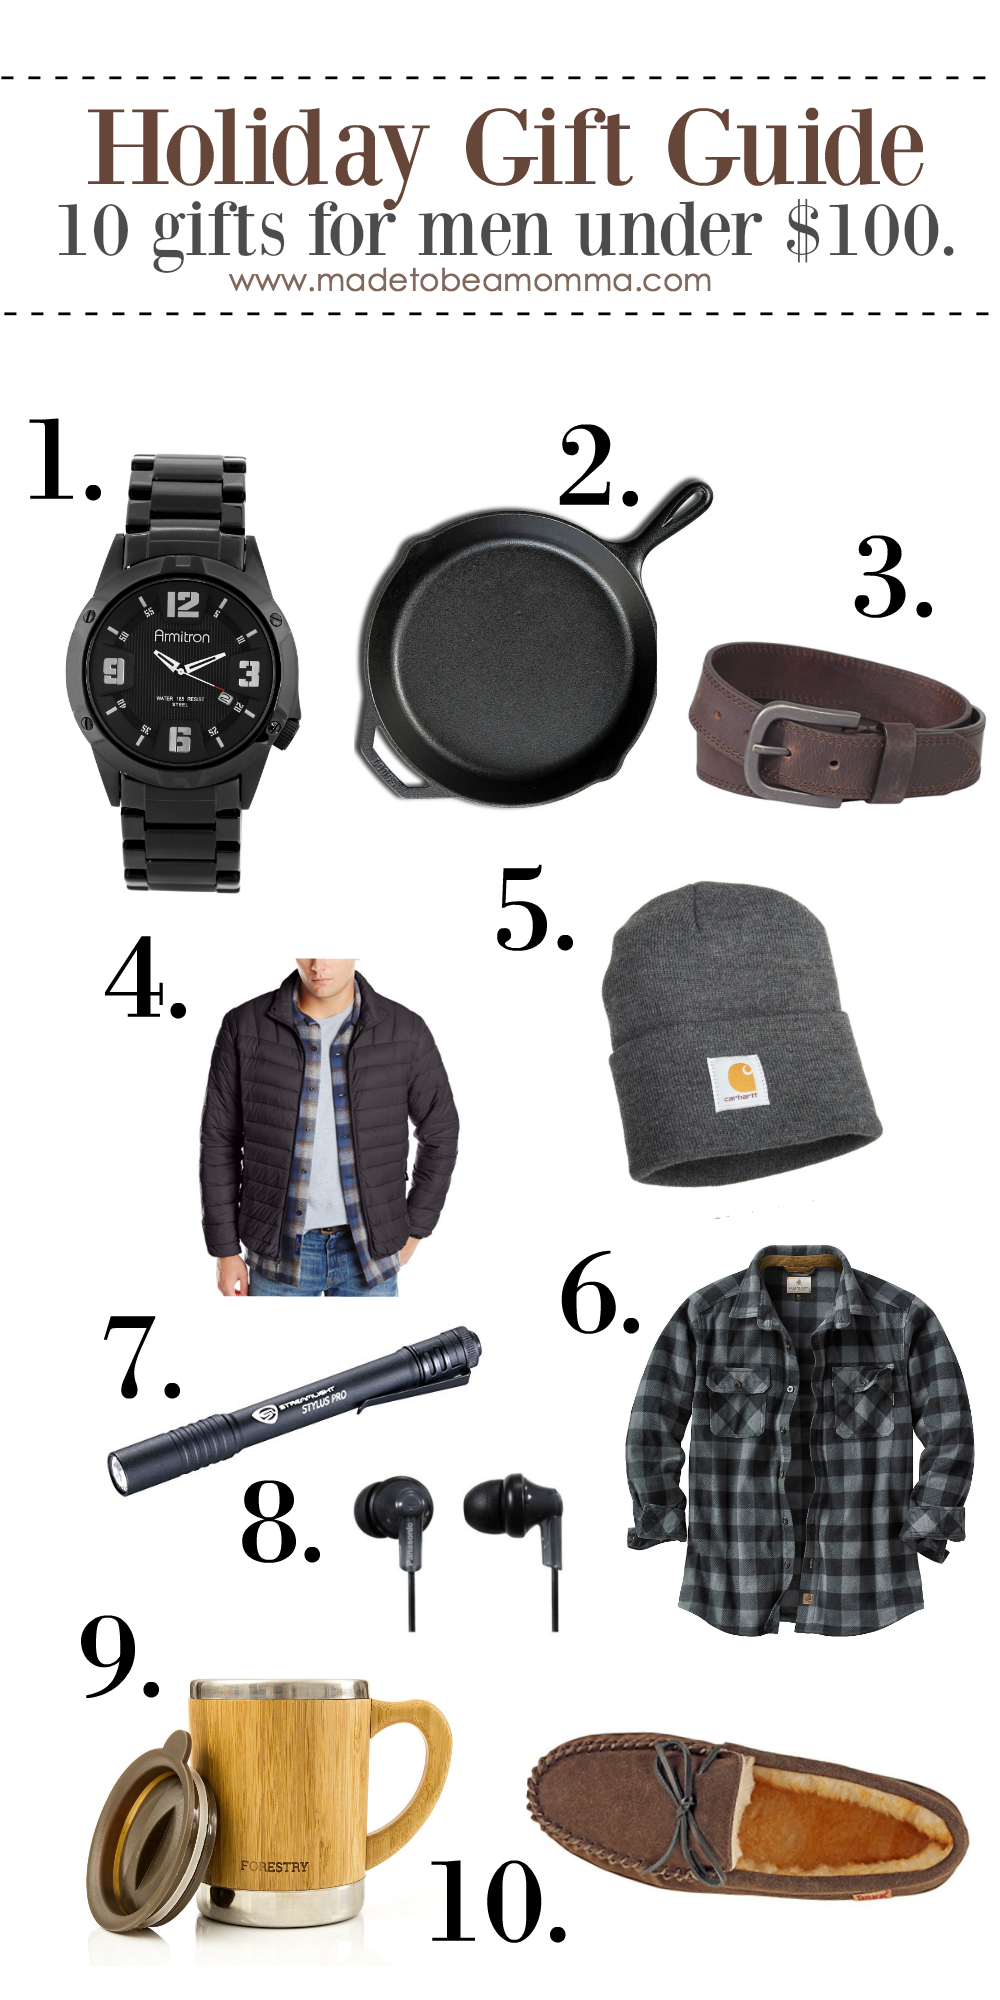 Holiday Gift Guide: 10 Gifts for Men - Made To Be A Momma